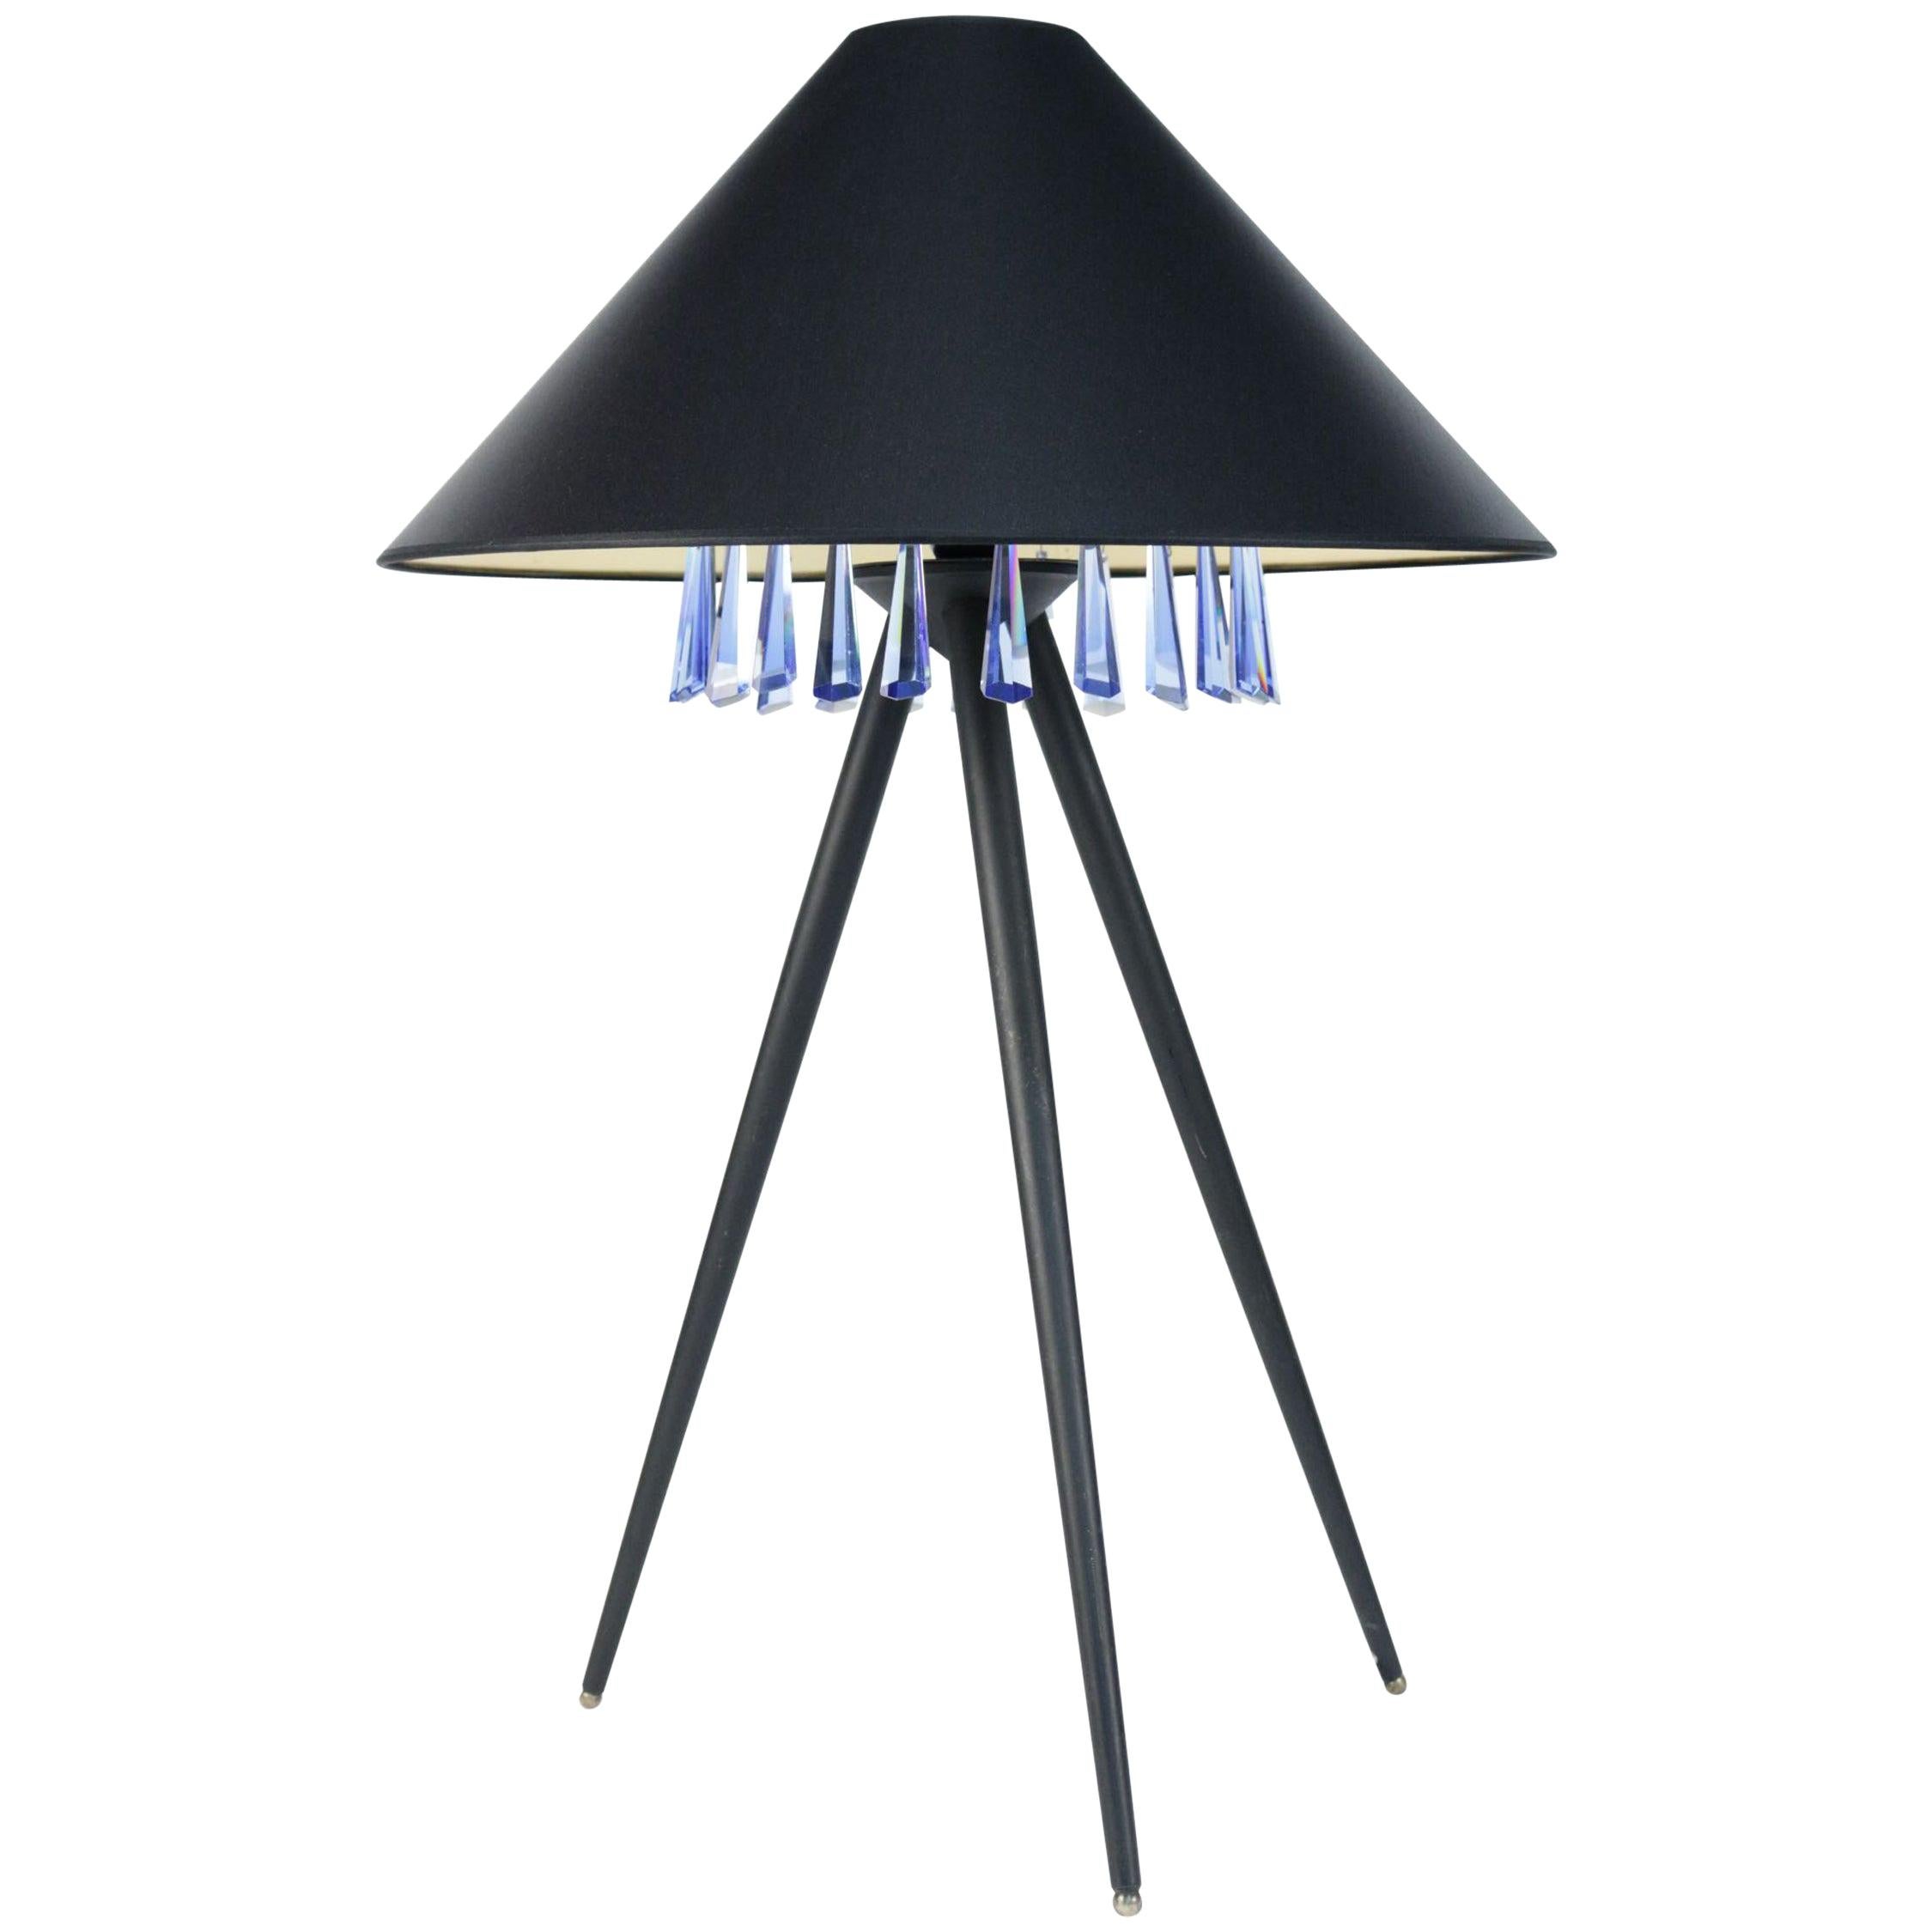 1970s Yamo Table Lamp for Galerie Chrystiane Charles